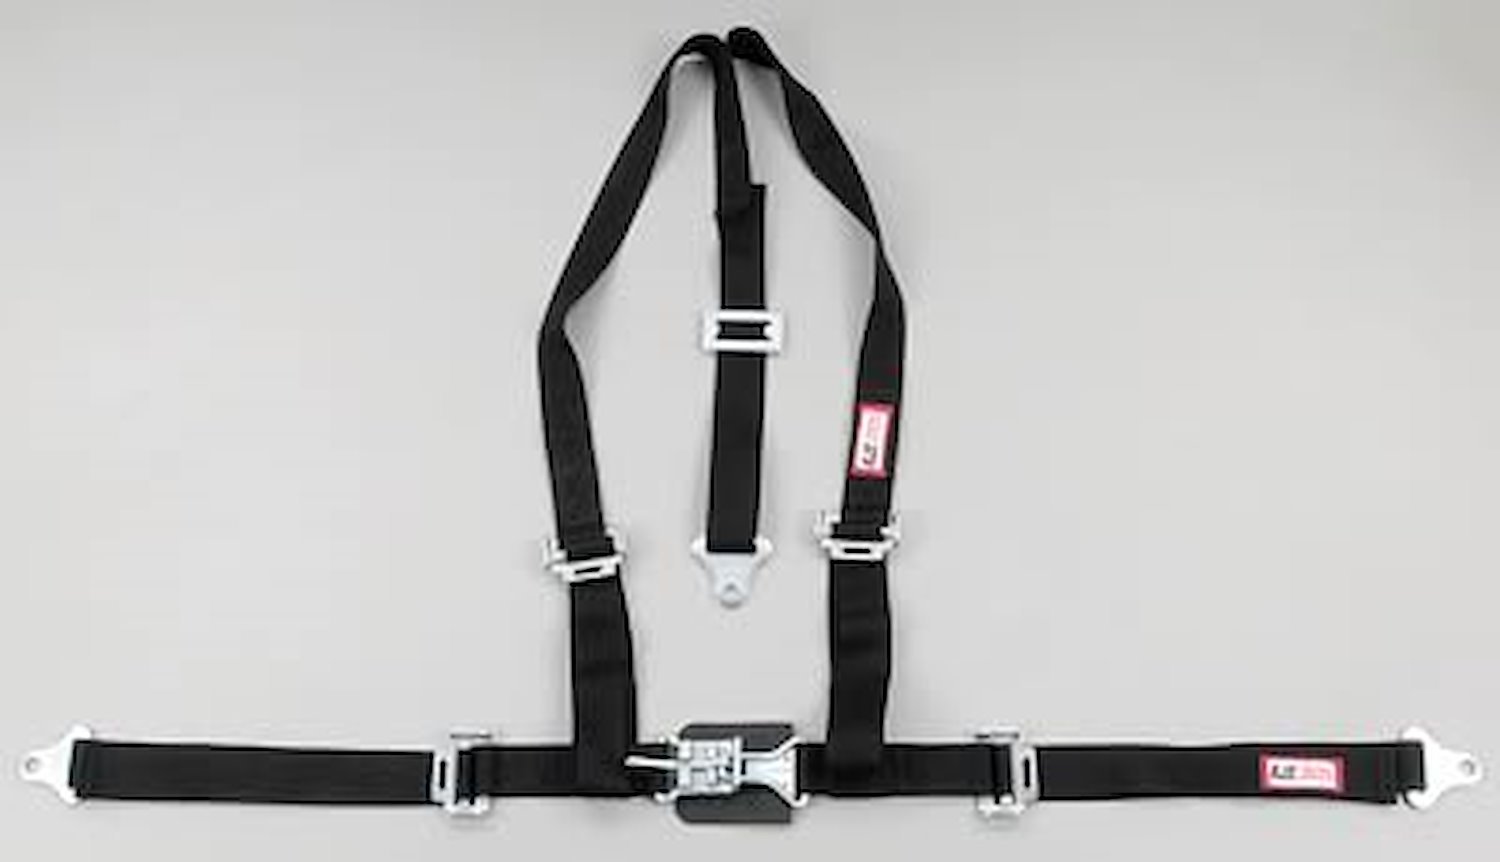 NON-SFI L&L HARNESS 2 PULL UP Lap Belt SNAP SEWN IN 2 S.H. Individual ROLL BAR Mount w/STERNUM STRAP WRAP/SNAP PURPLE